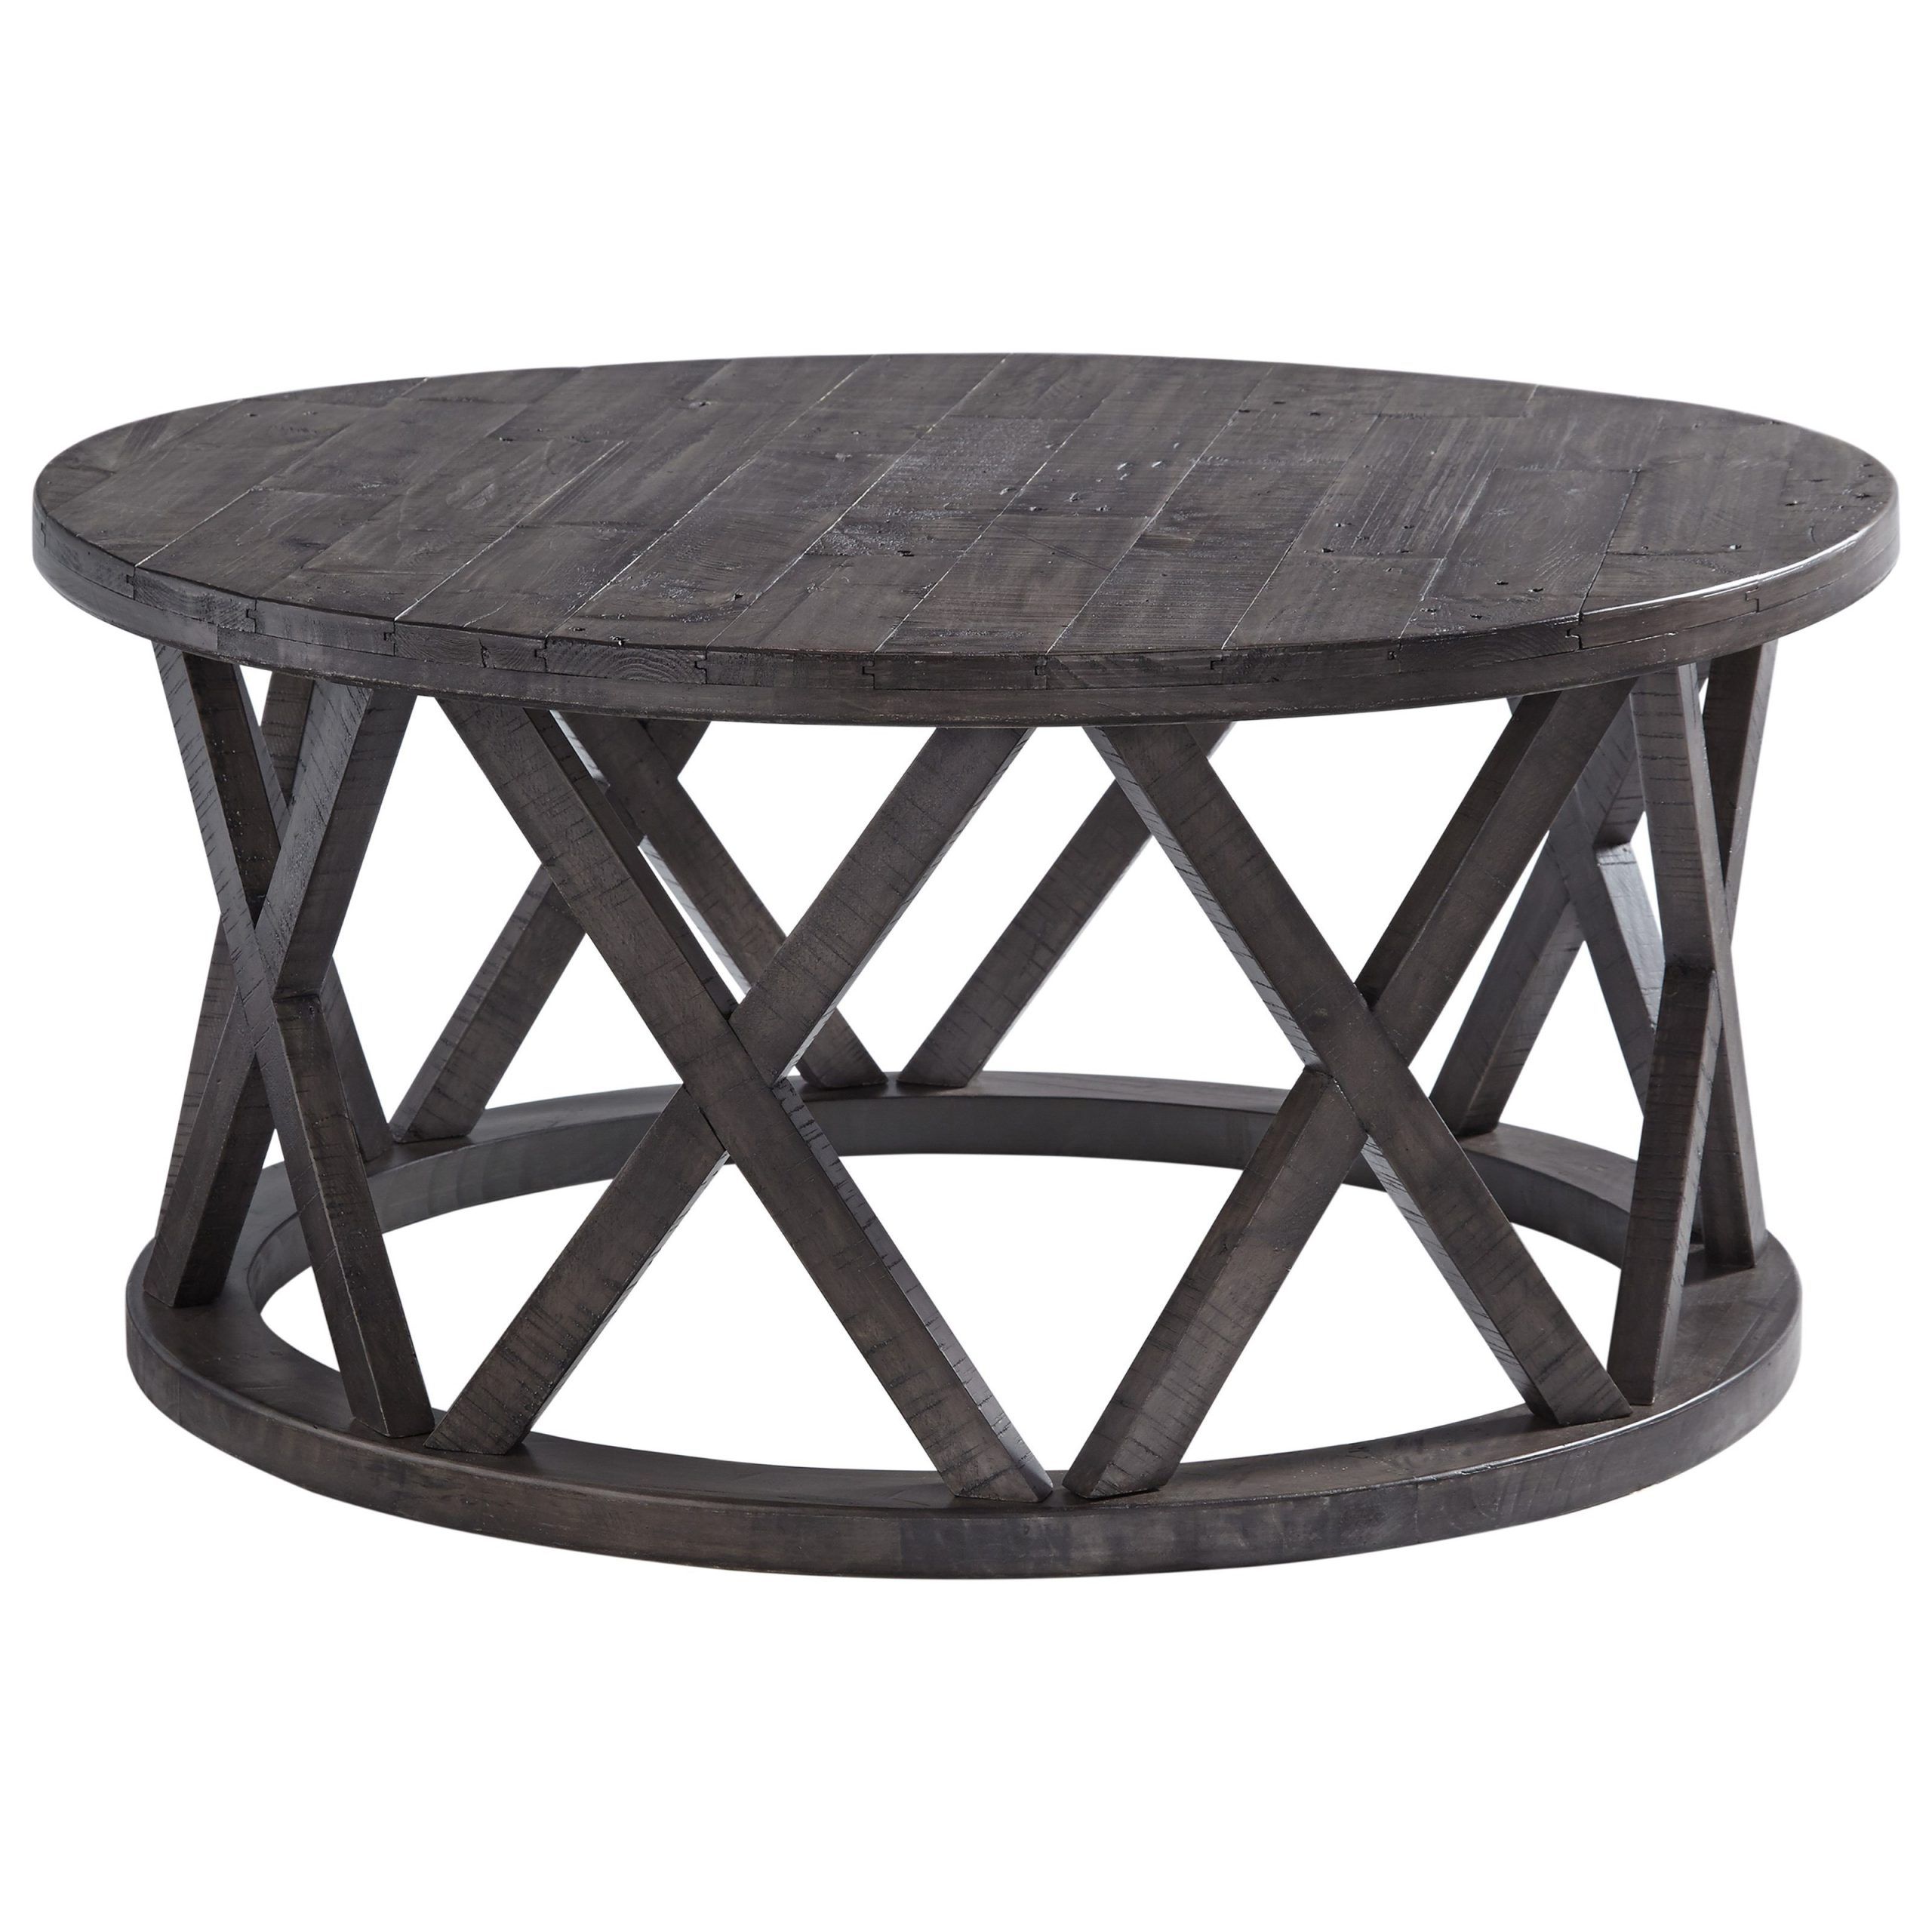 Signature Designashley Sharzane Round Cocktail Table With Regarding Gray Coastal Cocktail Tables (Gallery 15 of 22)